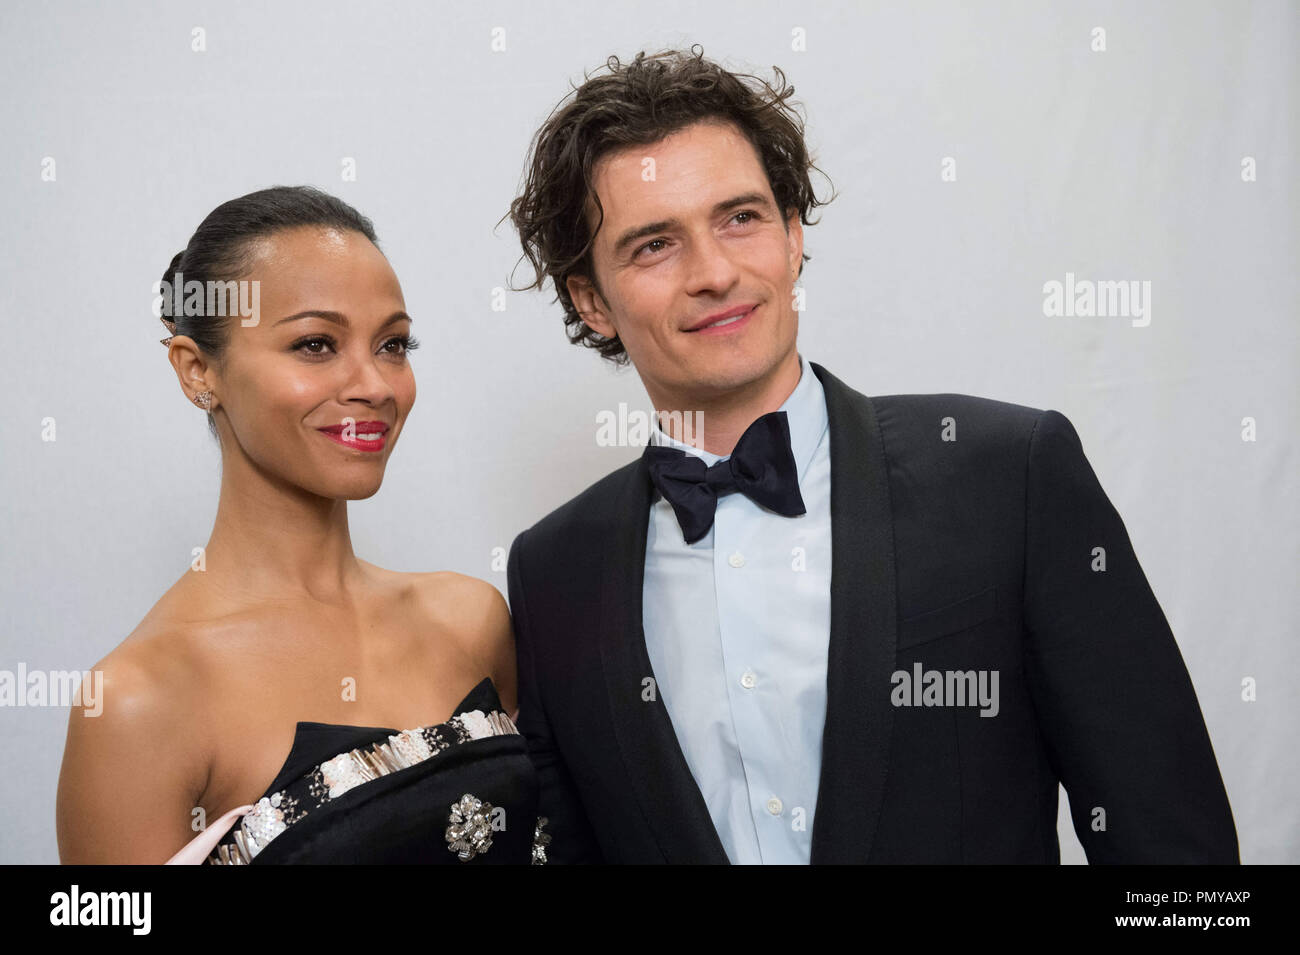 Zoe Saldana and Orlando Bloom at the 71st Annual Golden Globe Awards at the Beverly Hilton in Beverly Hills, CA on Sunday, January 12, 2014.  File Reference # 32222_472JRC  For Editorial Use Only -  All Rights Reserved Stock Photo